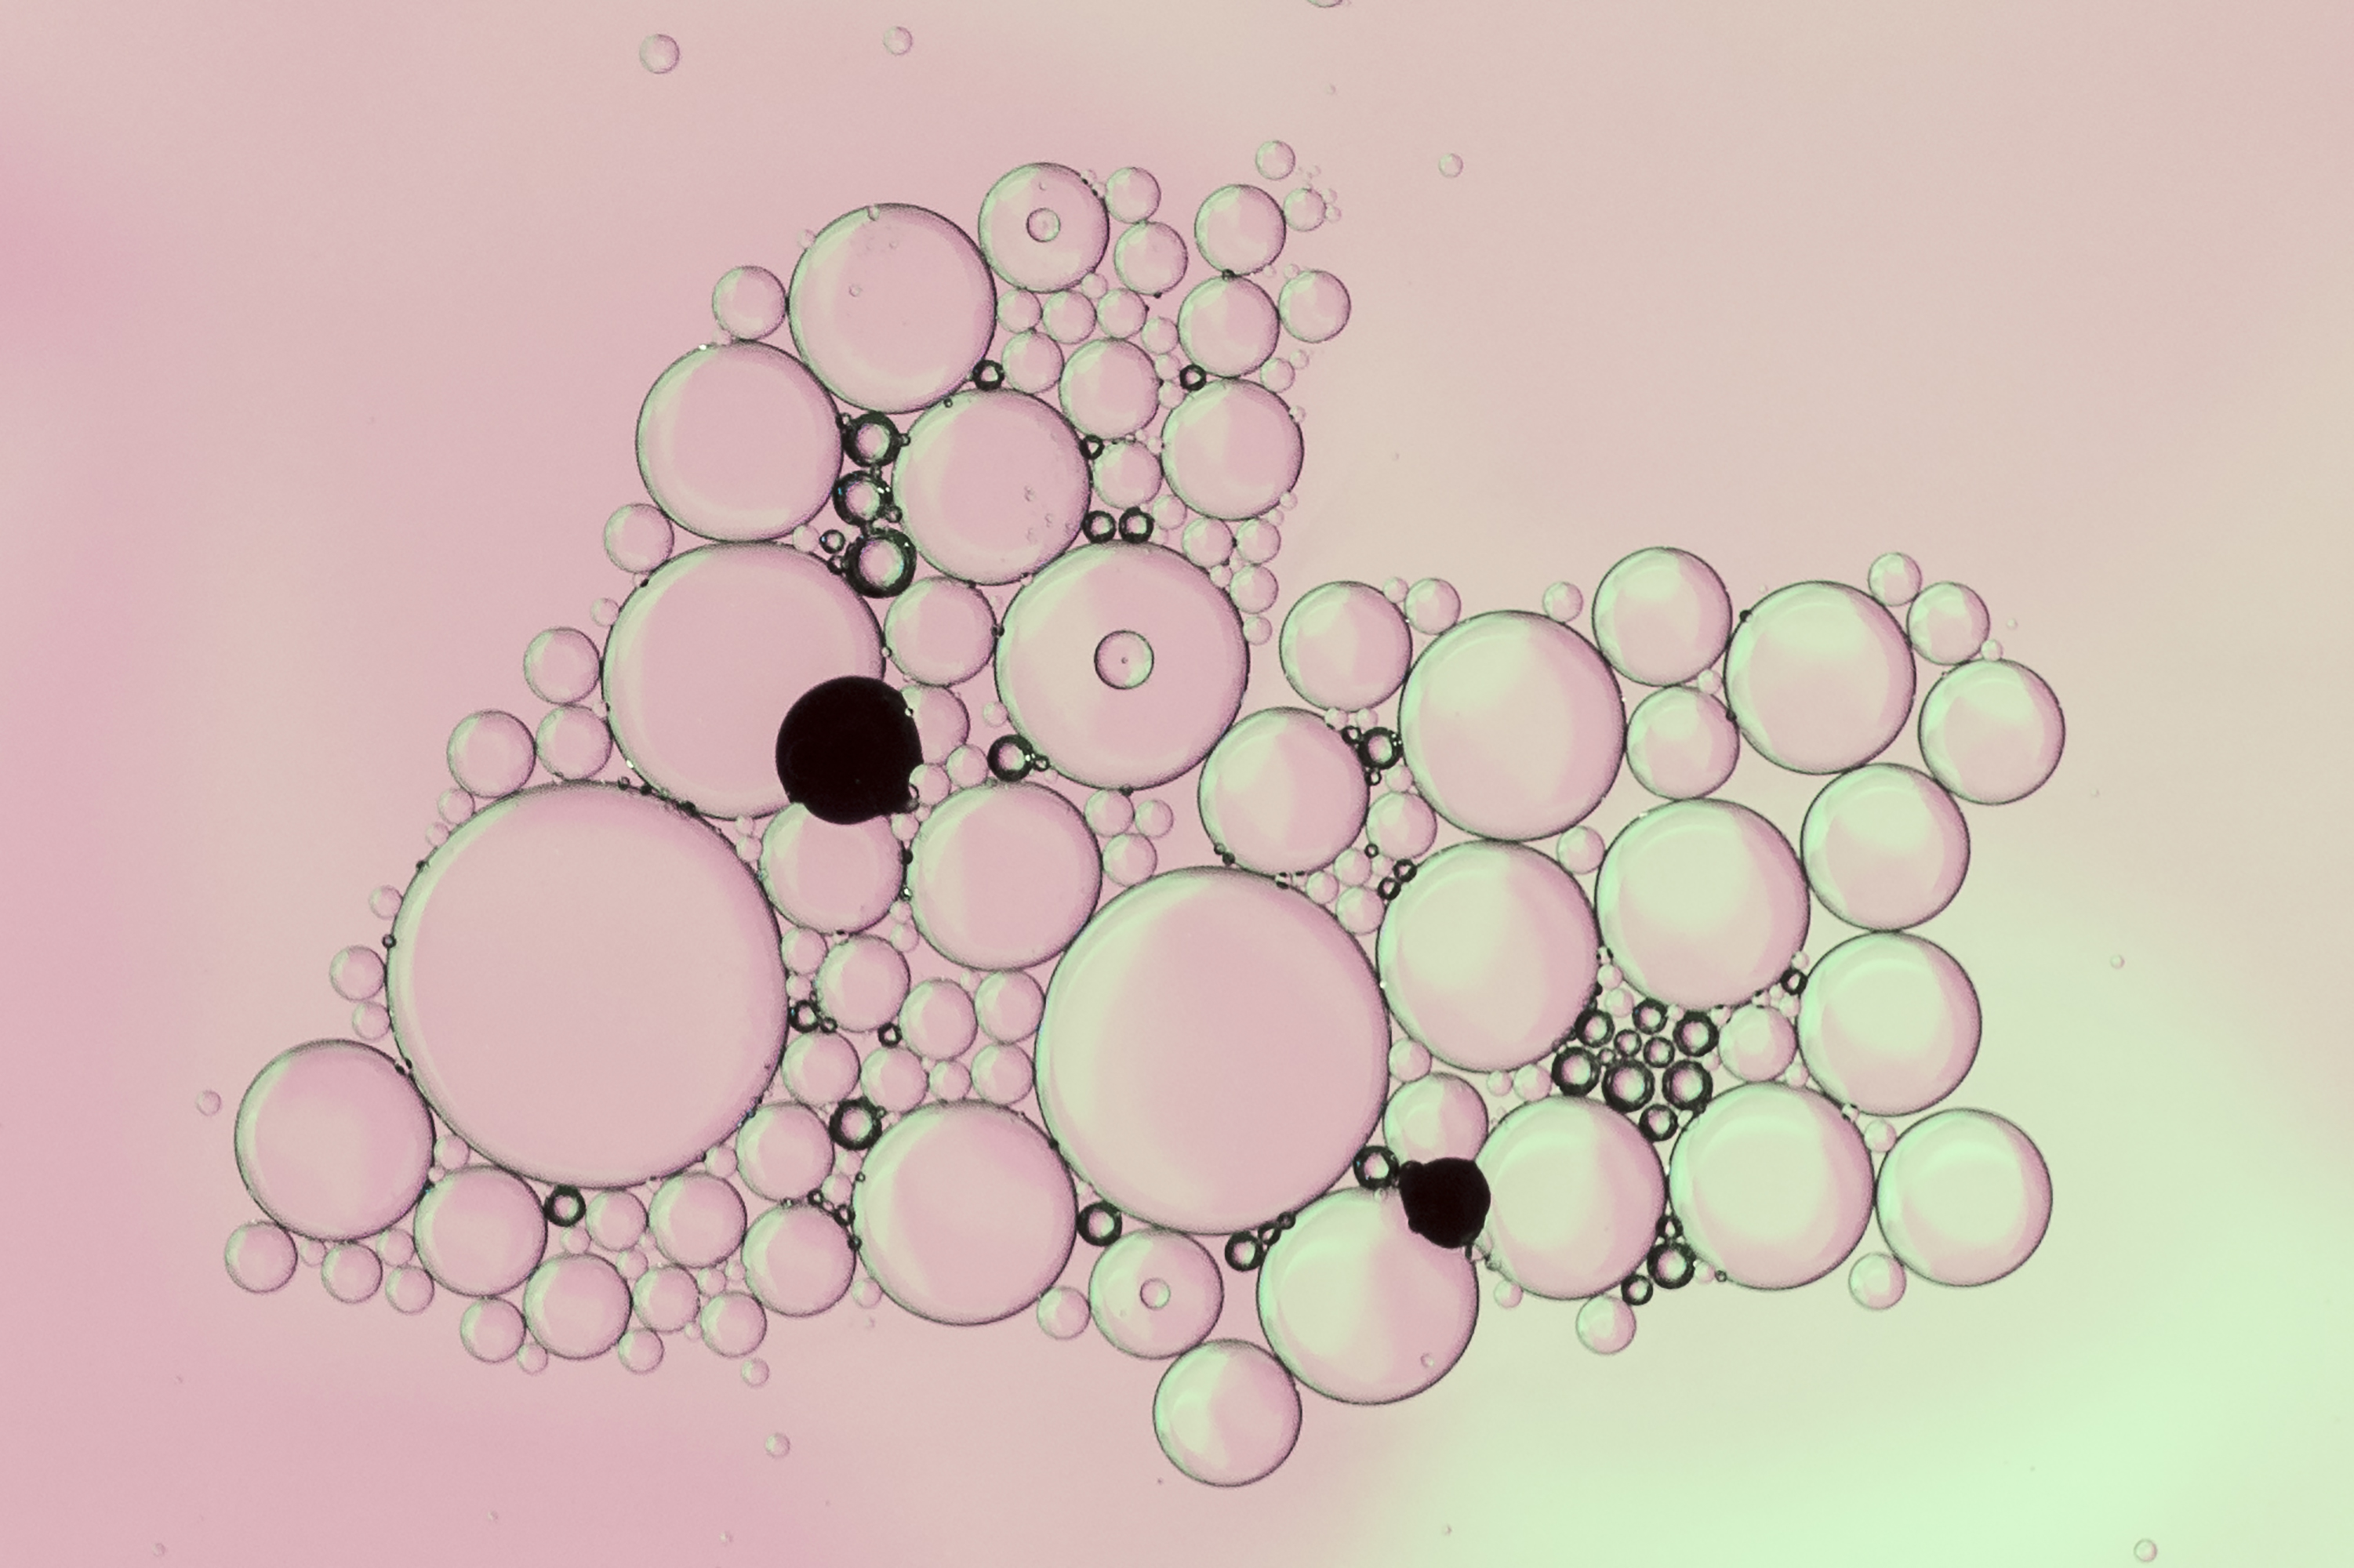 pale-pink-abstract-bubbles-with-black-dots (1)